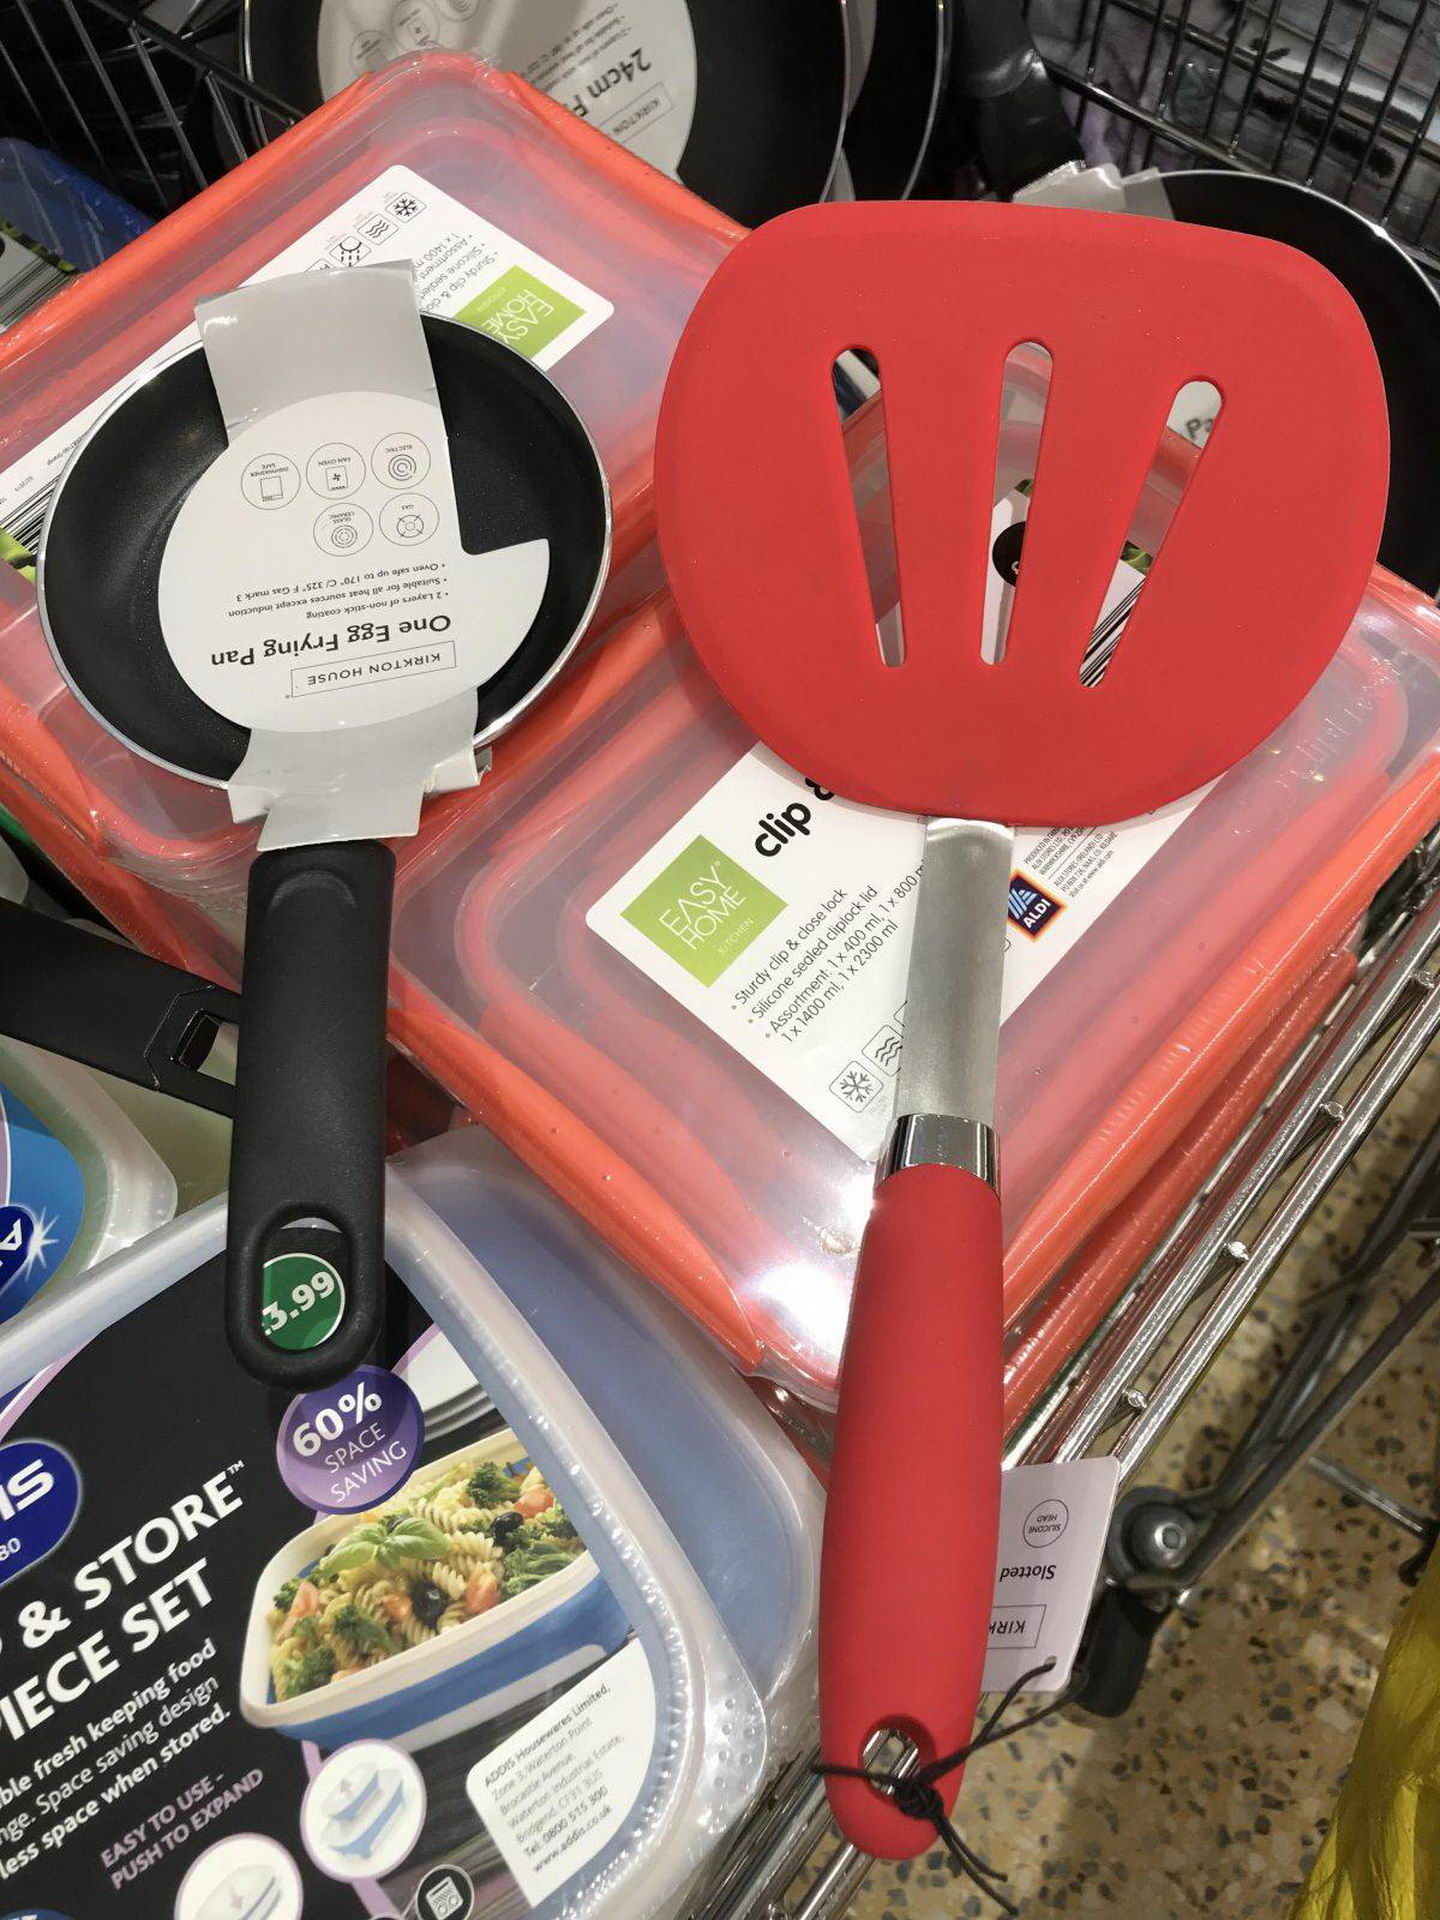 remarkable image of a small one egg frying pan next to a large spatula